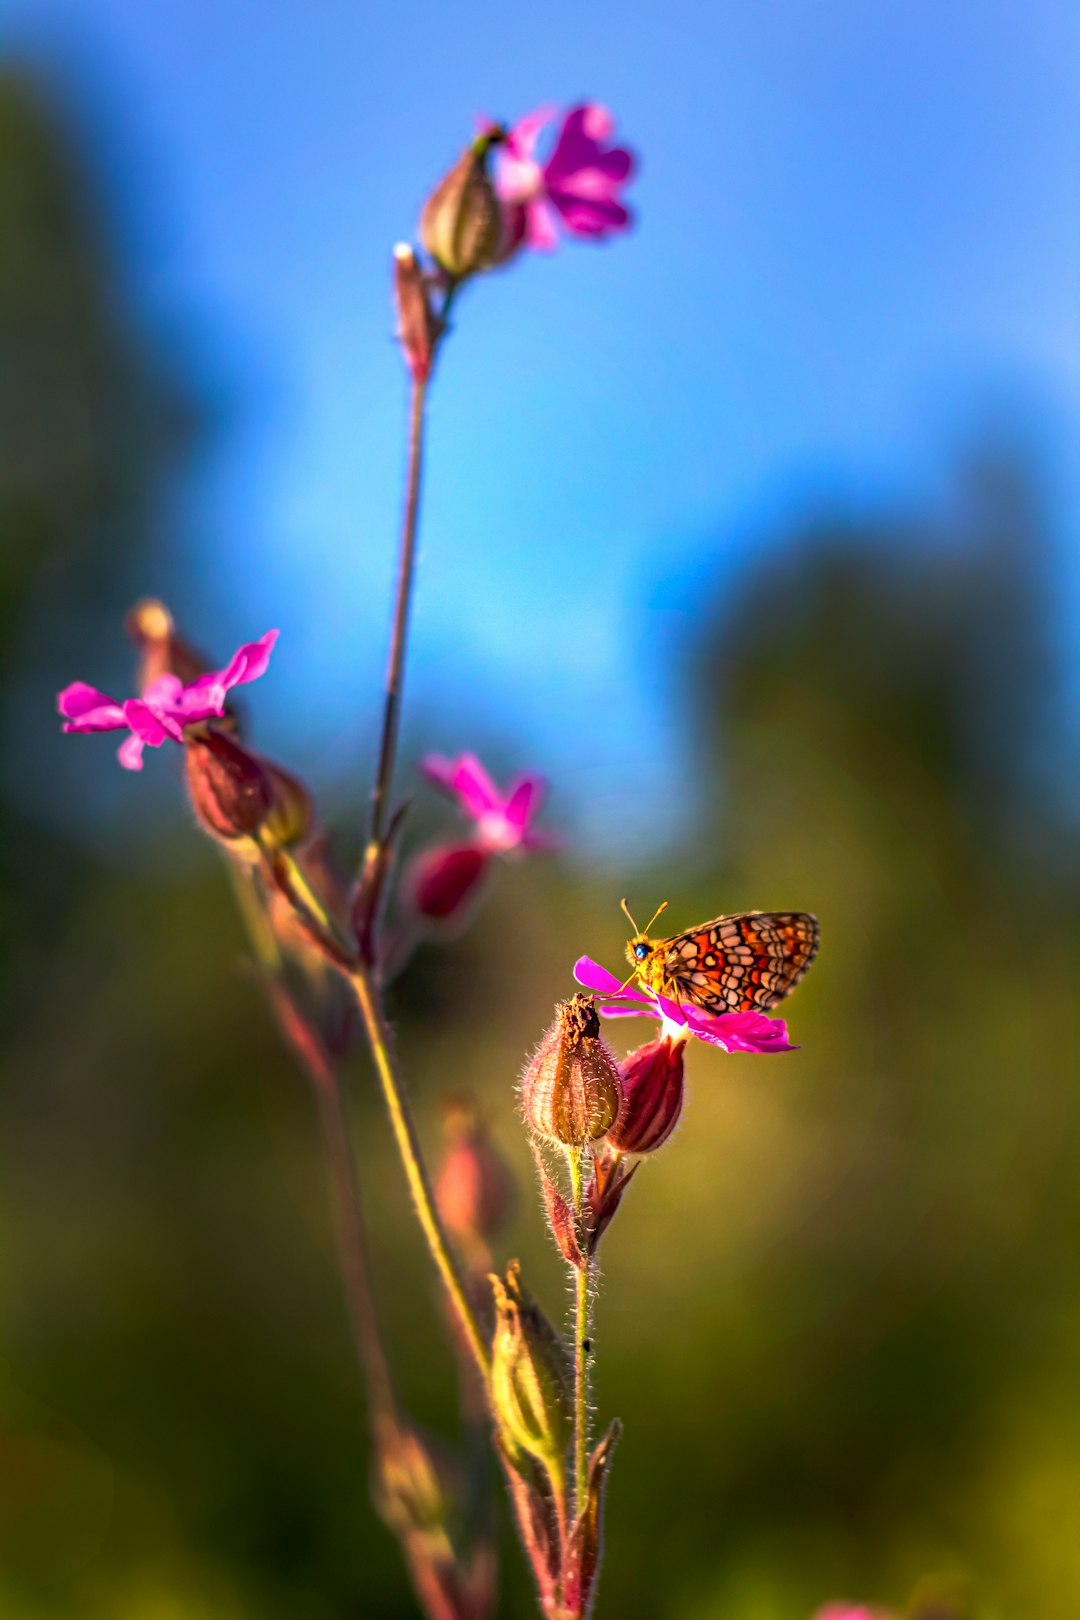 brown and black butterfly perched on pink flower in close up photography during daytime